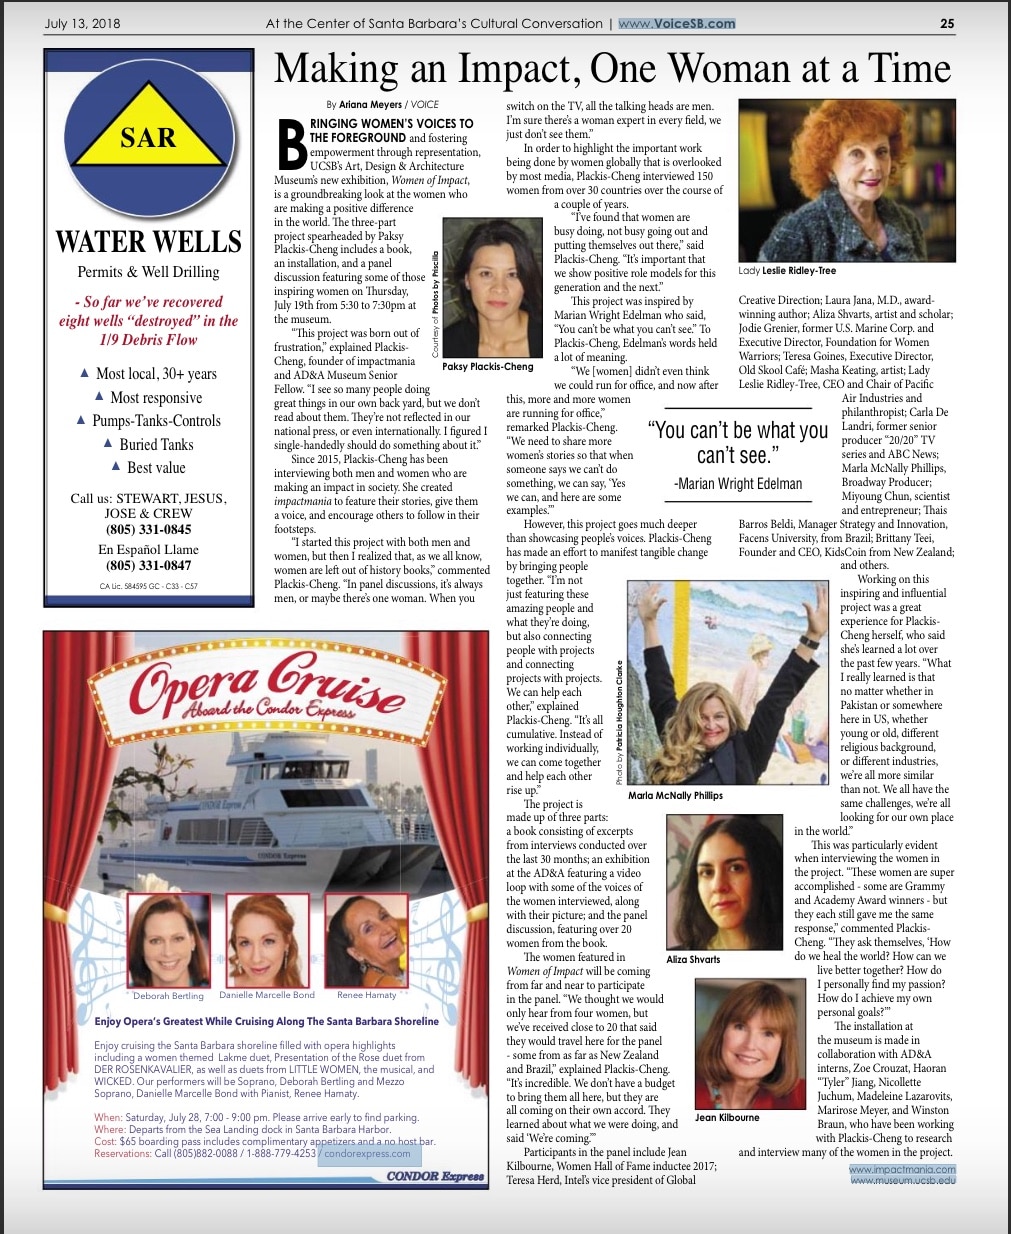 Women of Impact in The Voice Magazine. Article by Ariana Meyers.